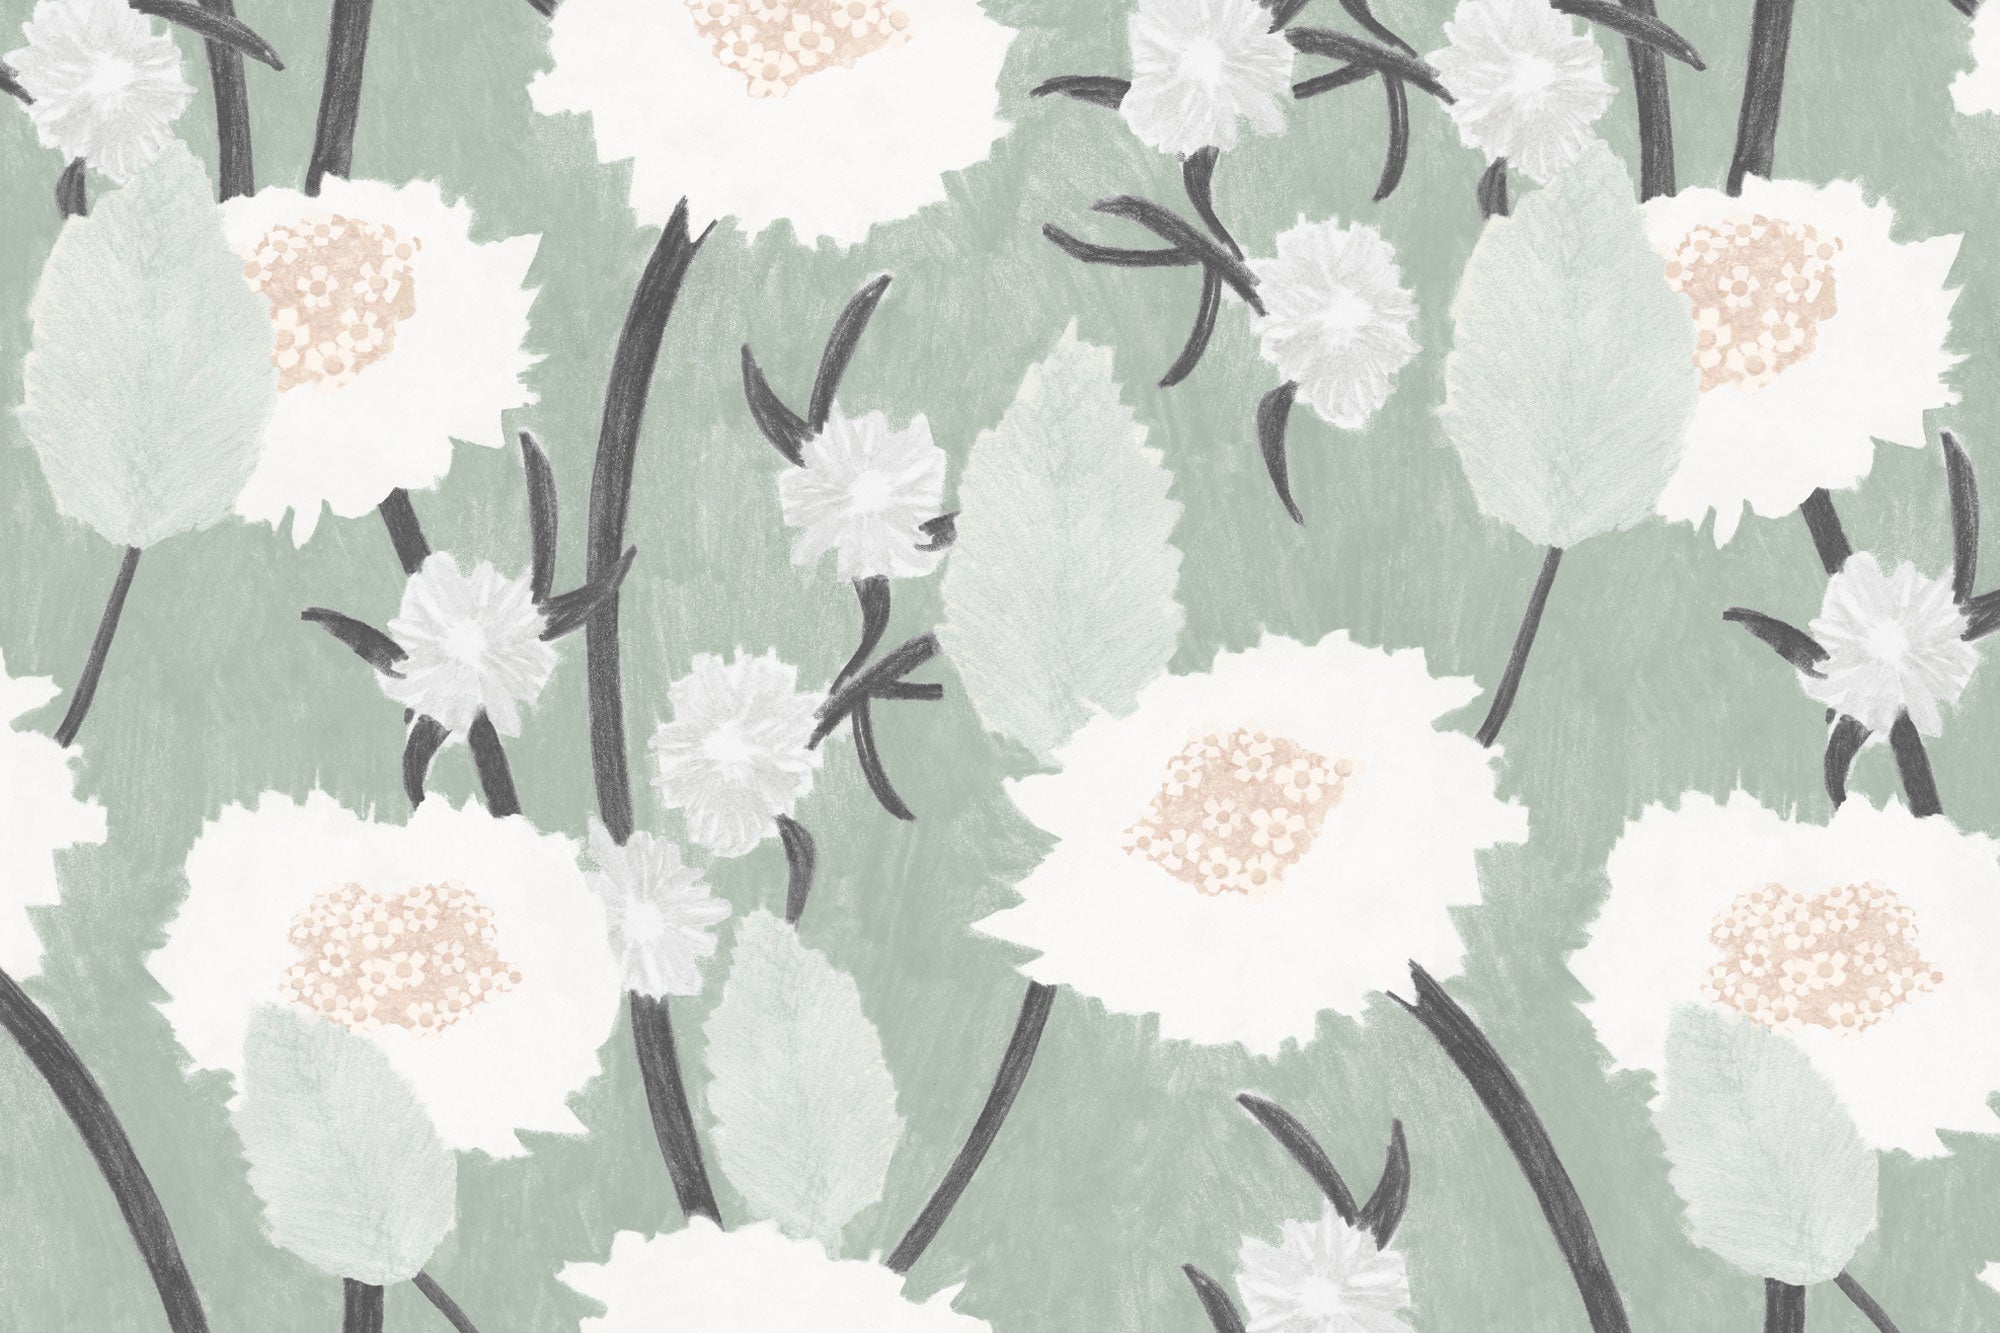 Detail of wallpaper in a playful floral print in shades of white, pink and gray on a pale green field.